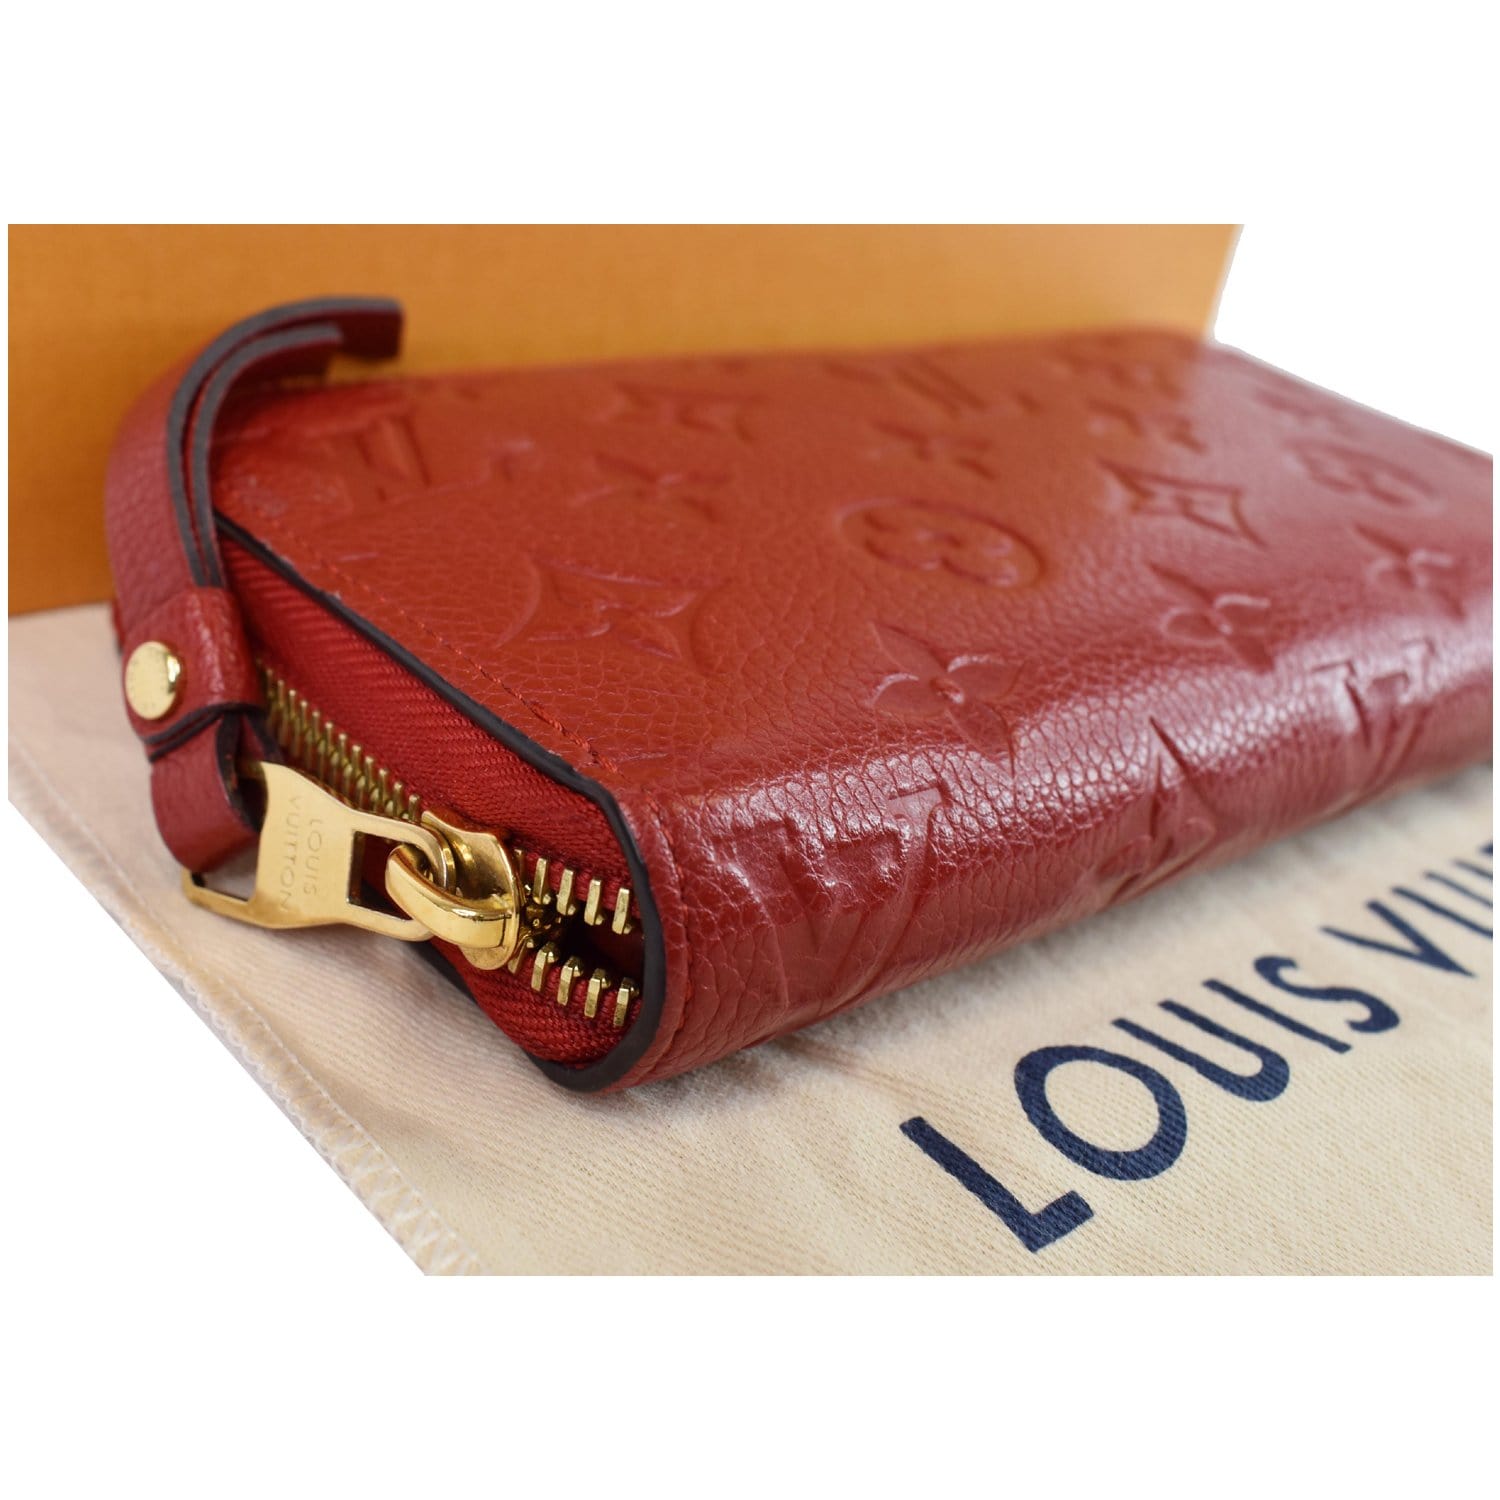 Zippy Wallet Monogram Empreinte Leather - Wallets and Small Leather Goods